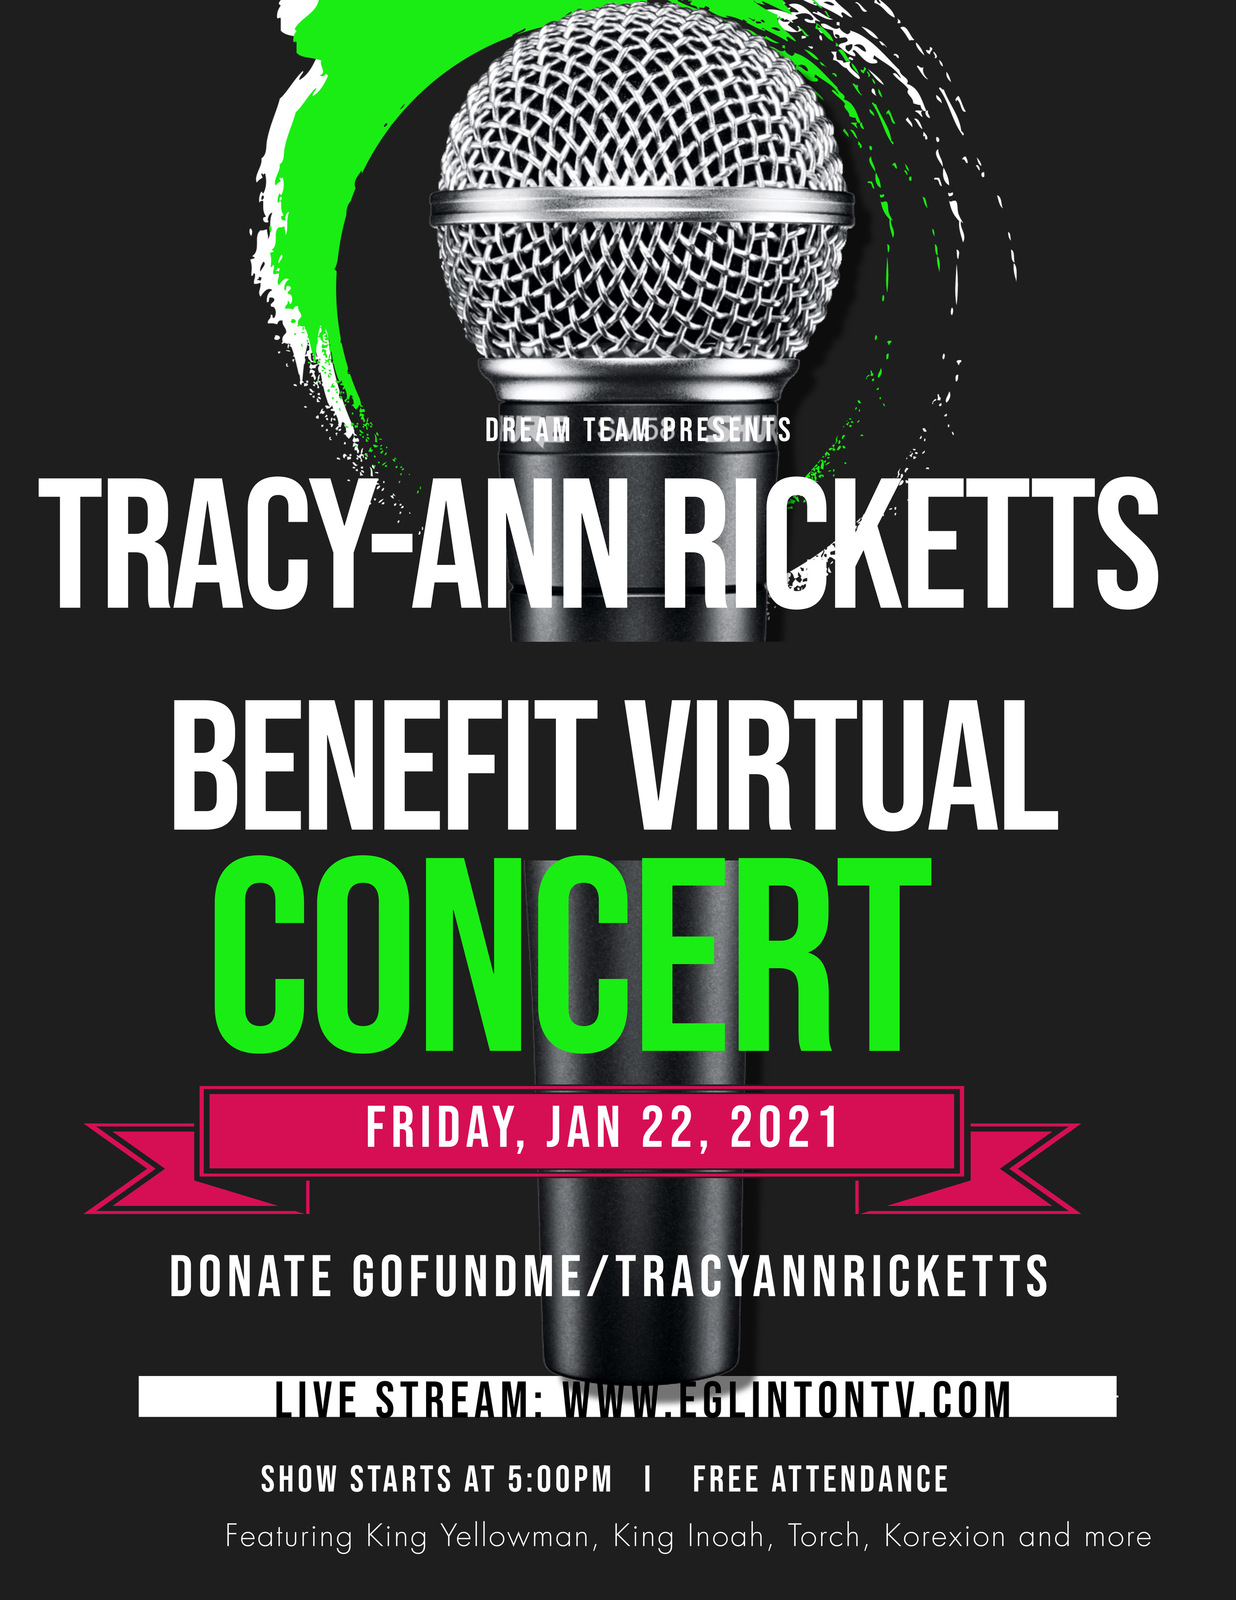 The Tracy-Ann Ricketts Virtual Benefit Concert